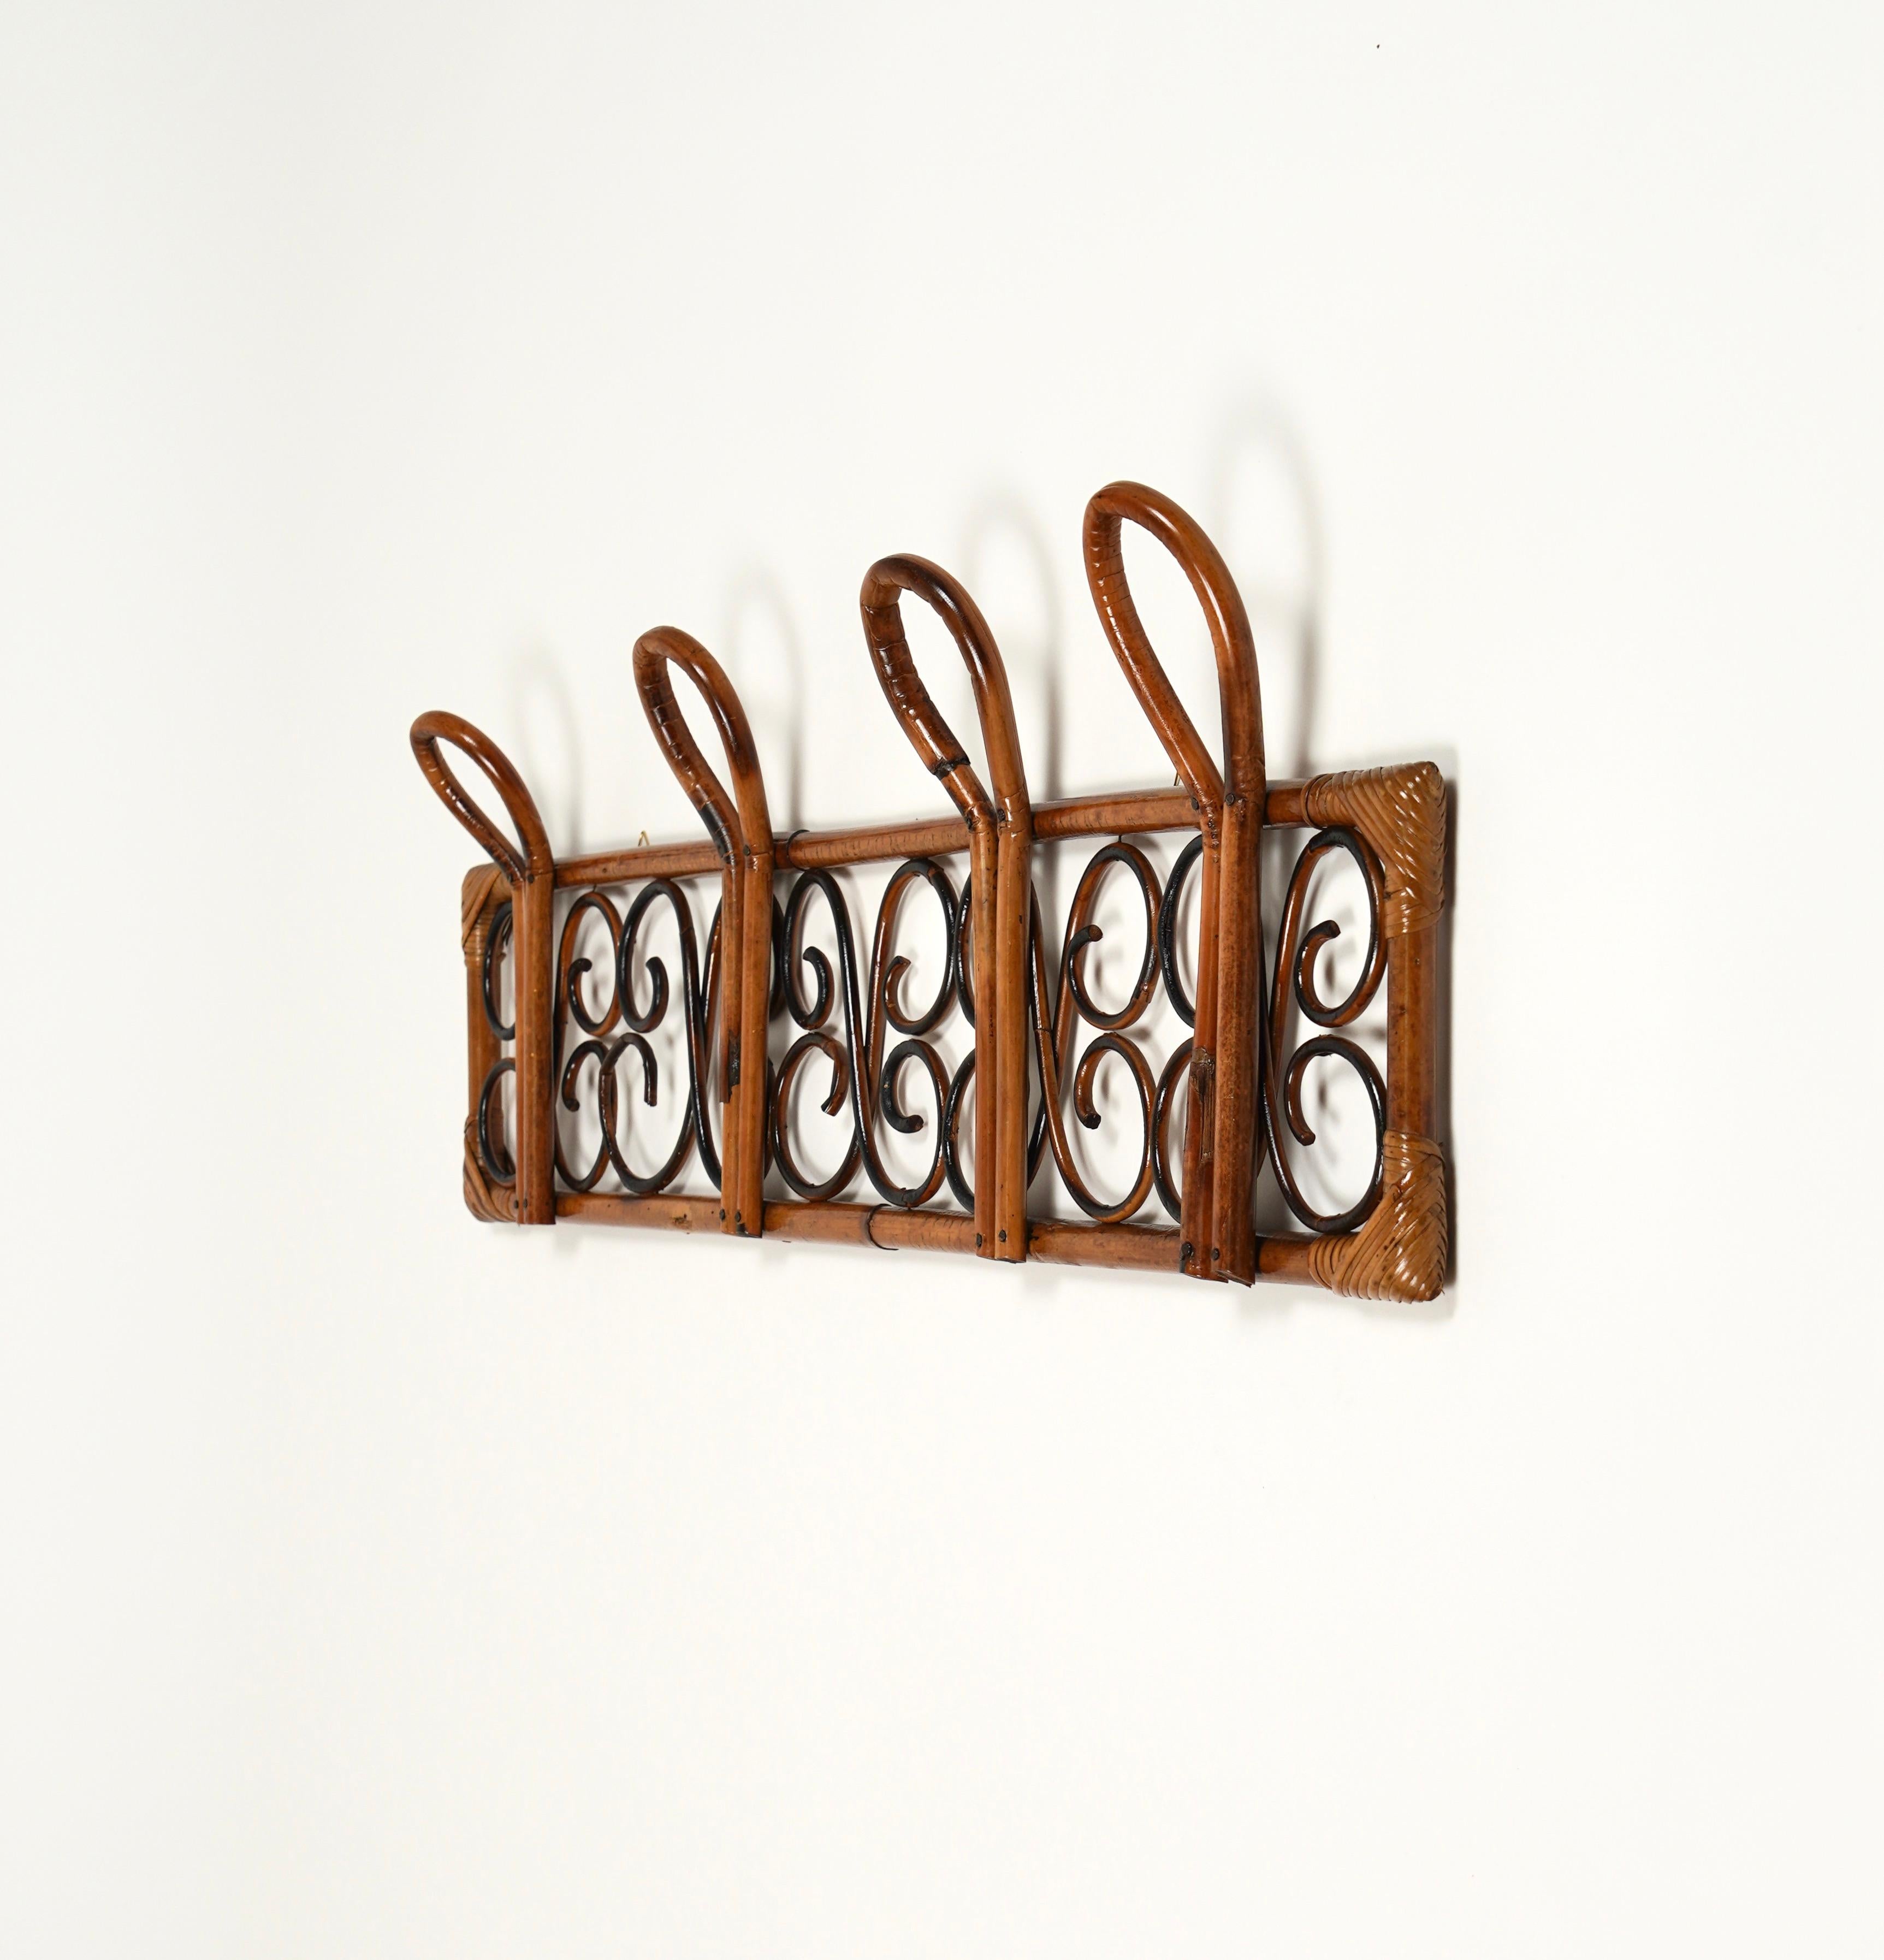 Midcentury Rattan and Bamboo Wall Coat Rack Stand, Italy, 1960s For Sale 2